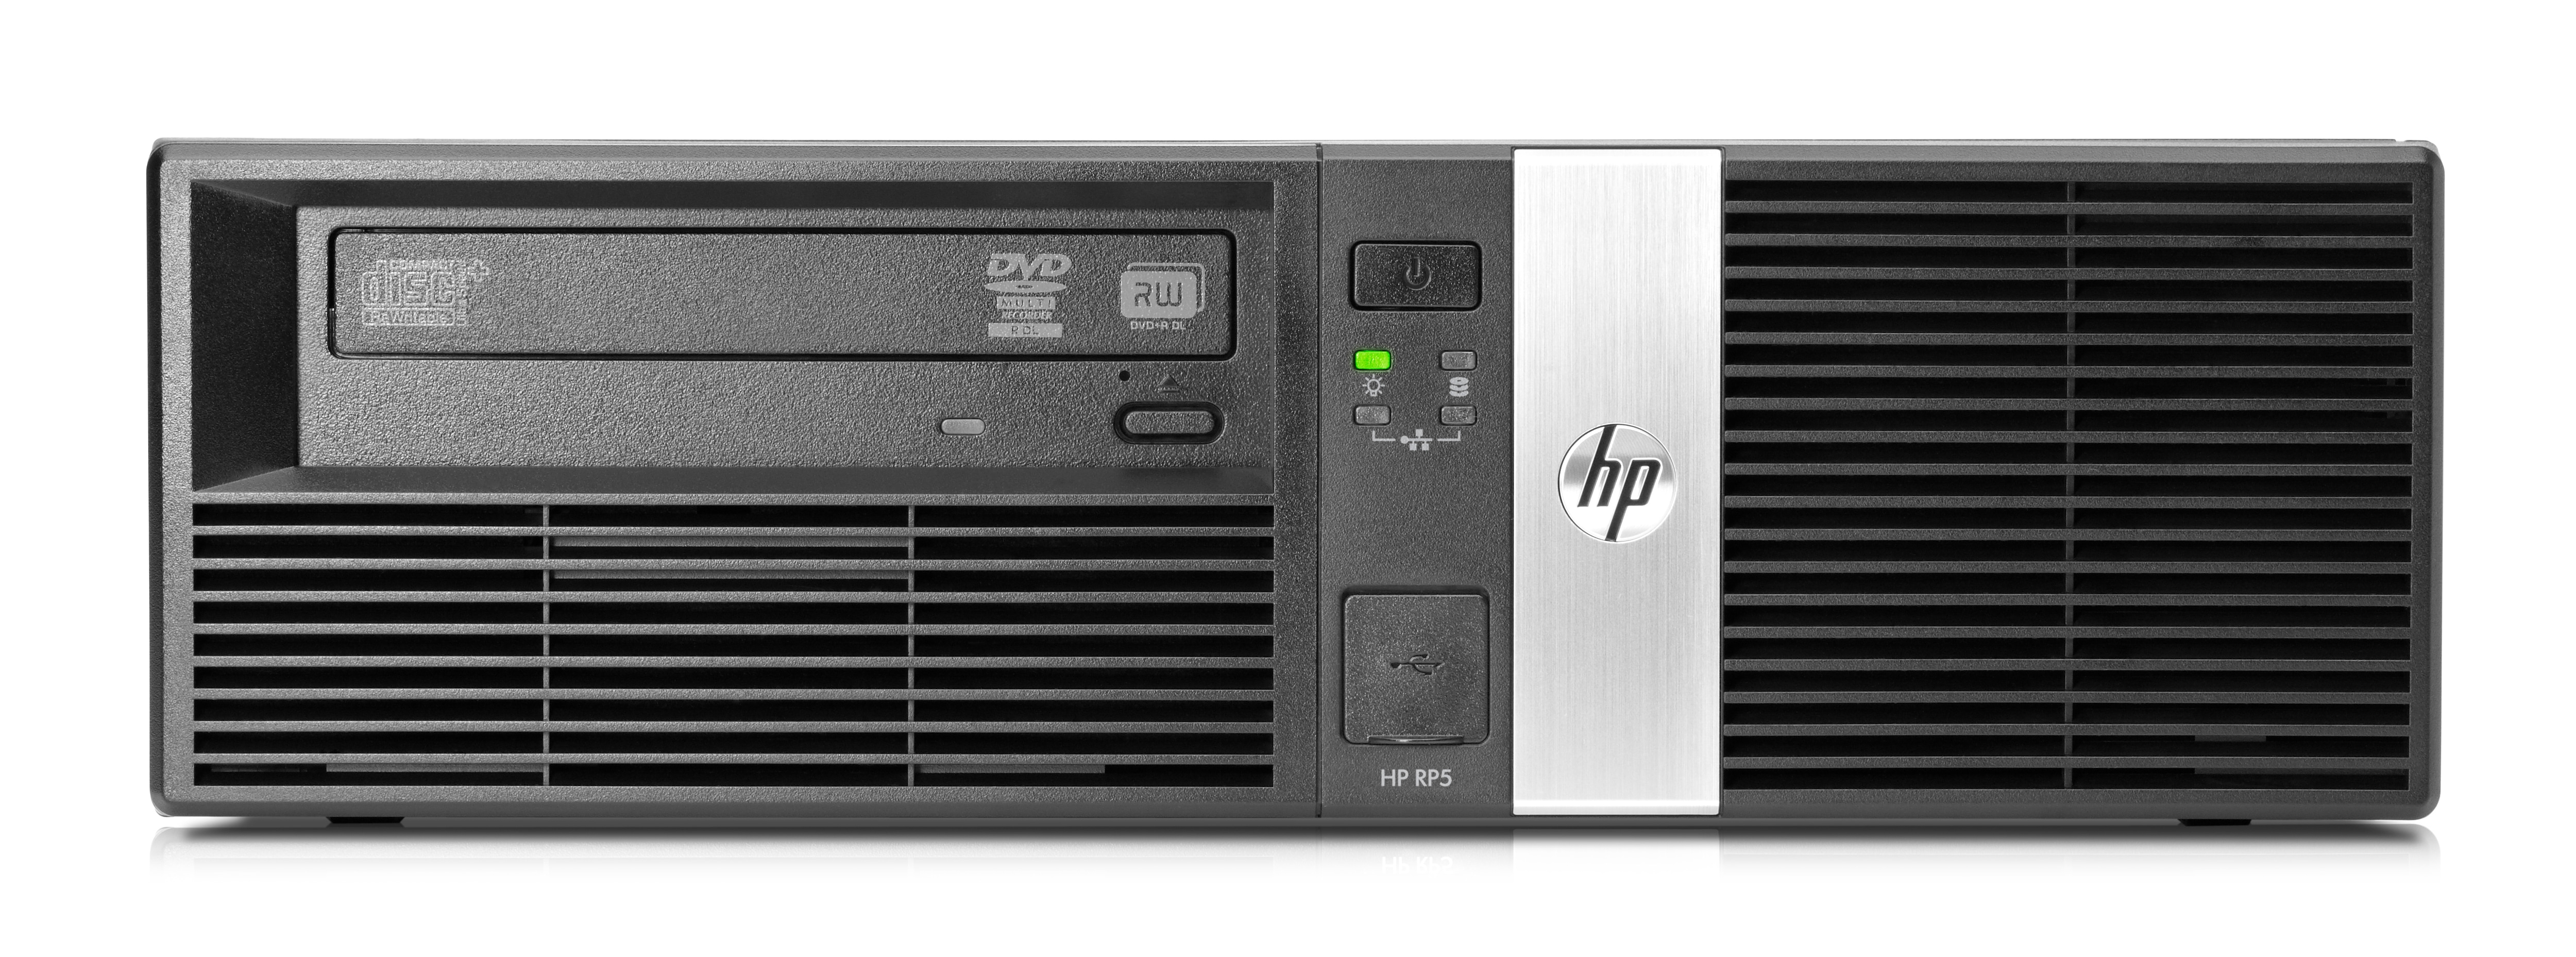 HP RP5 Retail System 5810 - DT - 1 x Core i3 4150 / 3.5 GHz